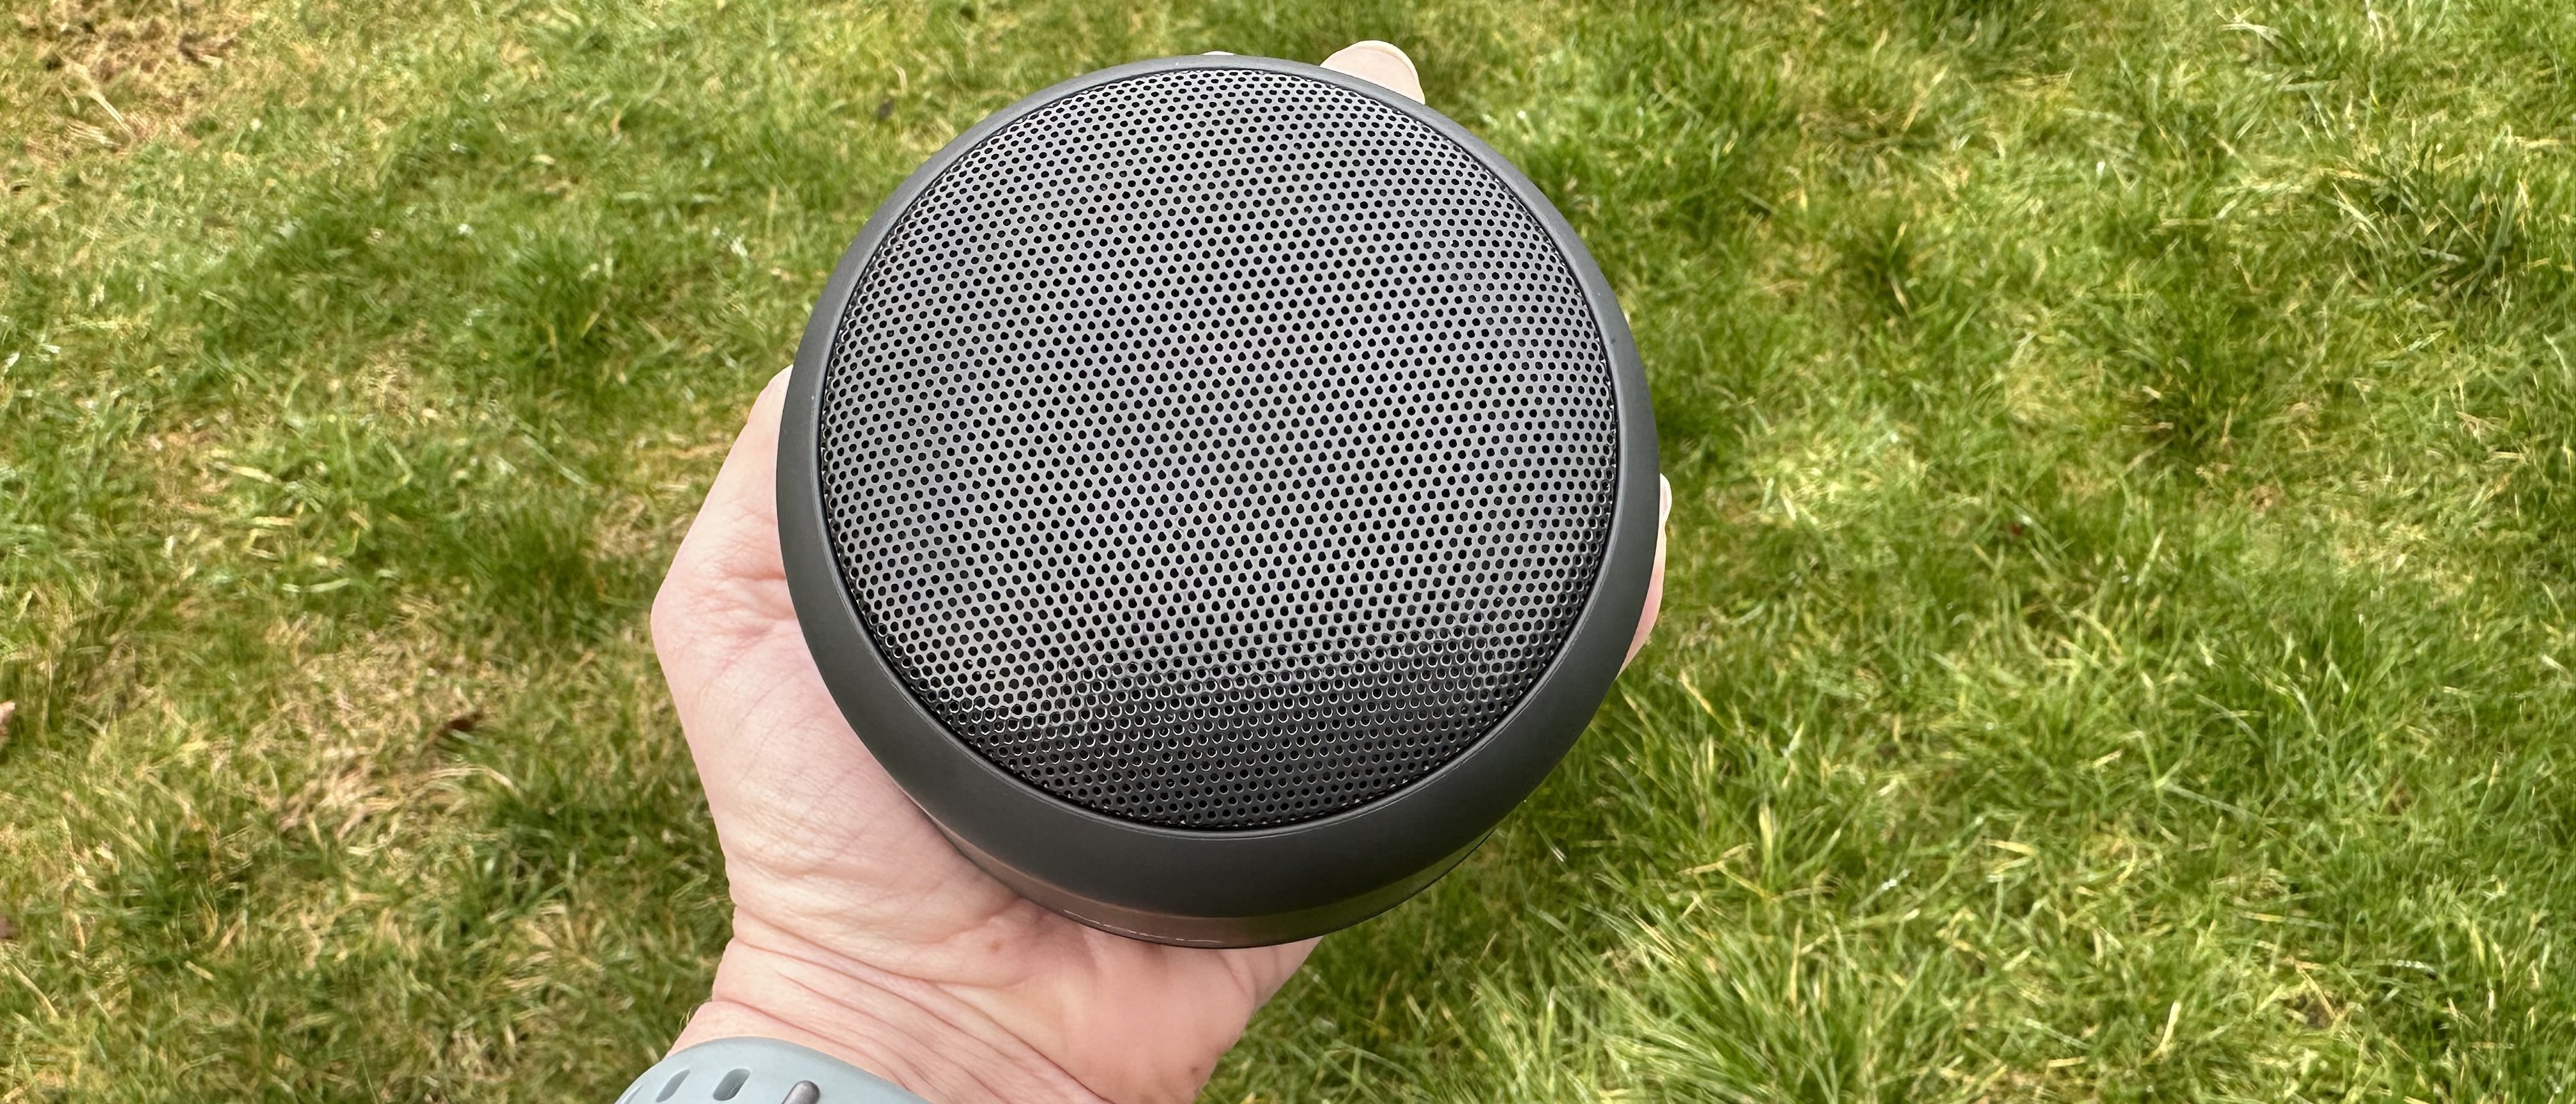 Nokia Portable Wireless Speaker cheap battery speaker 2 life | TechRadar Bluetooth review: a huge with